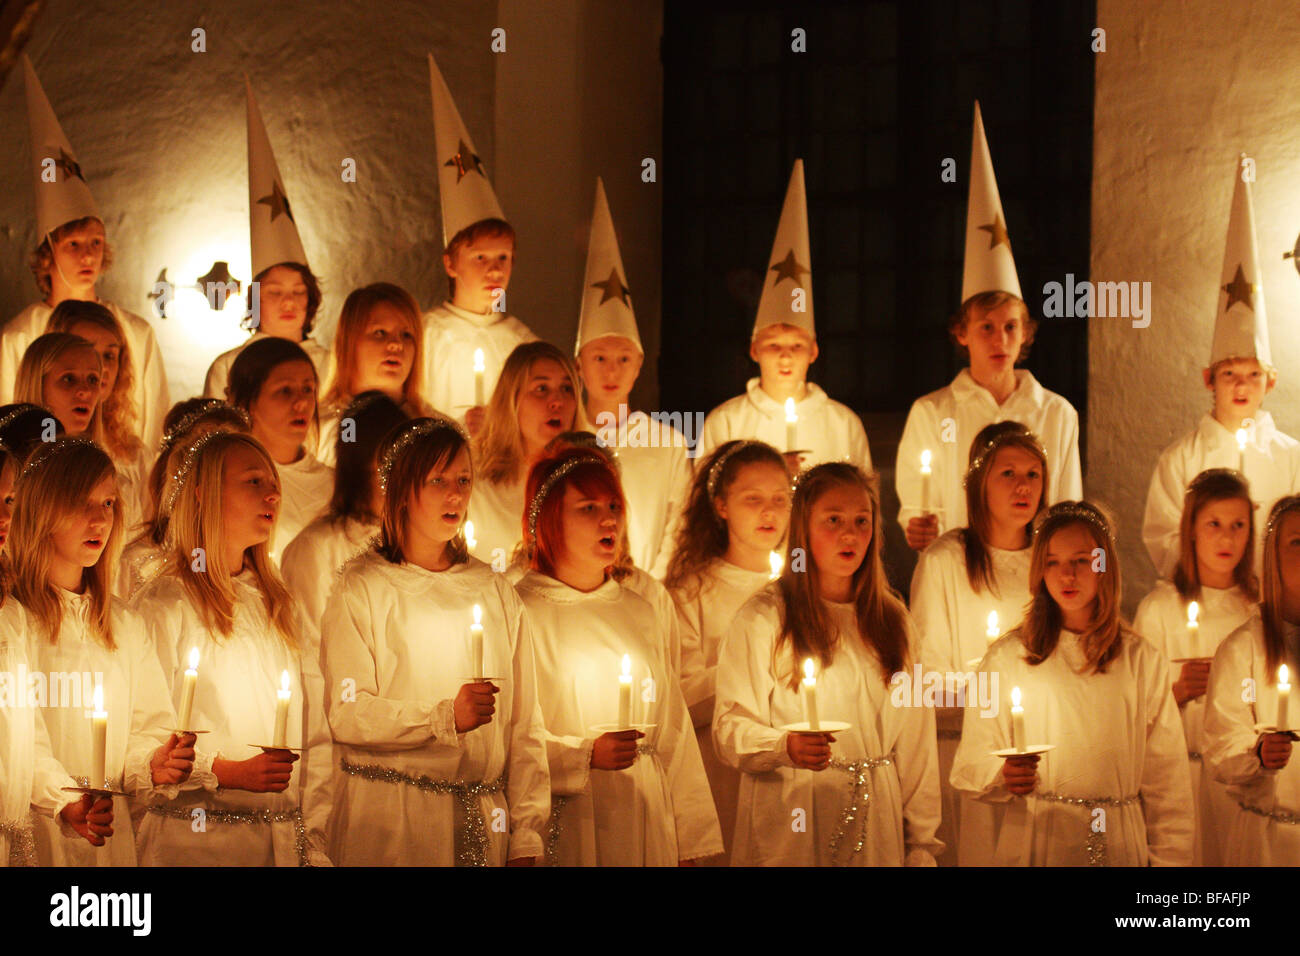 Choral group singing Saint lucia songs in a church. Stock Photo